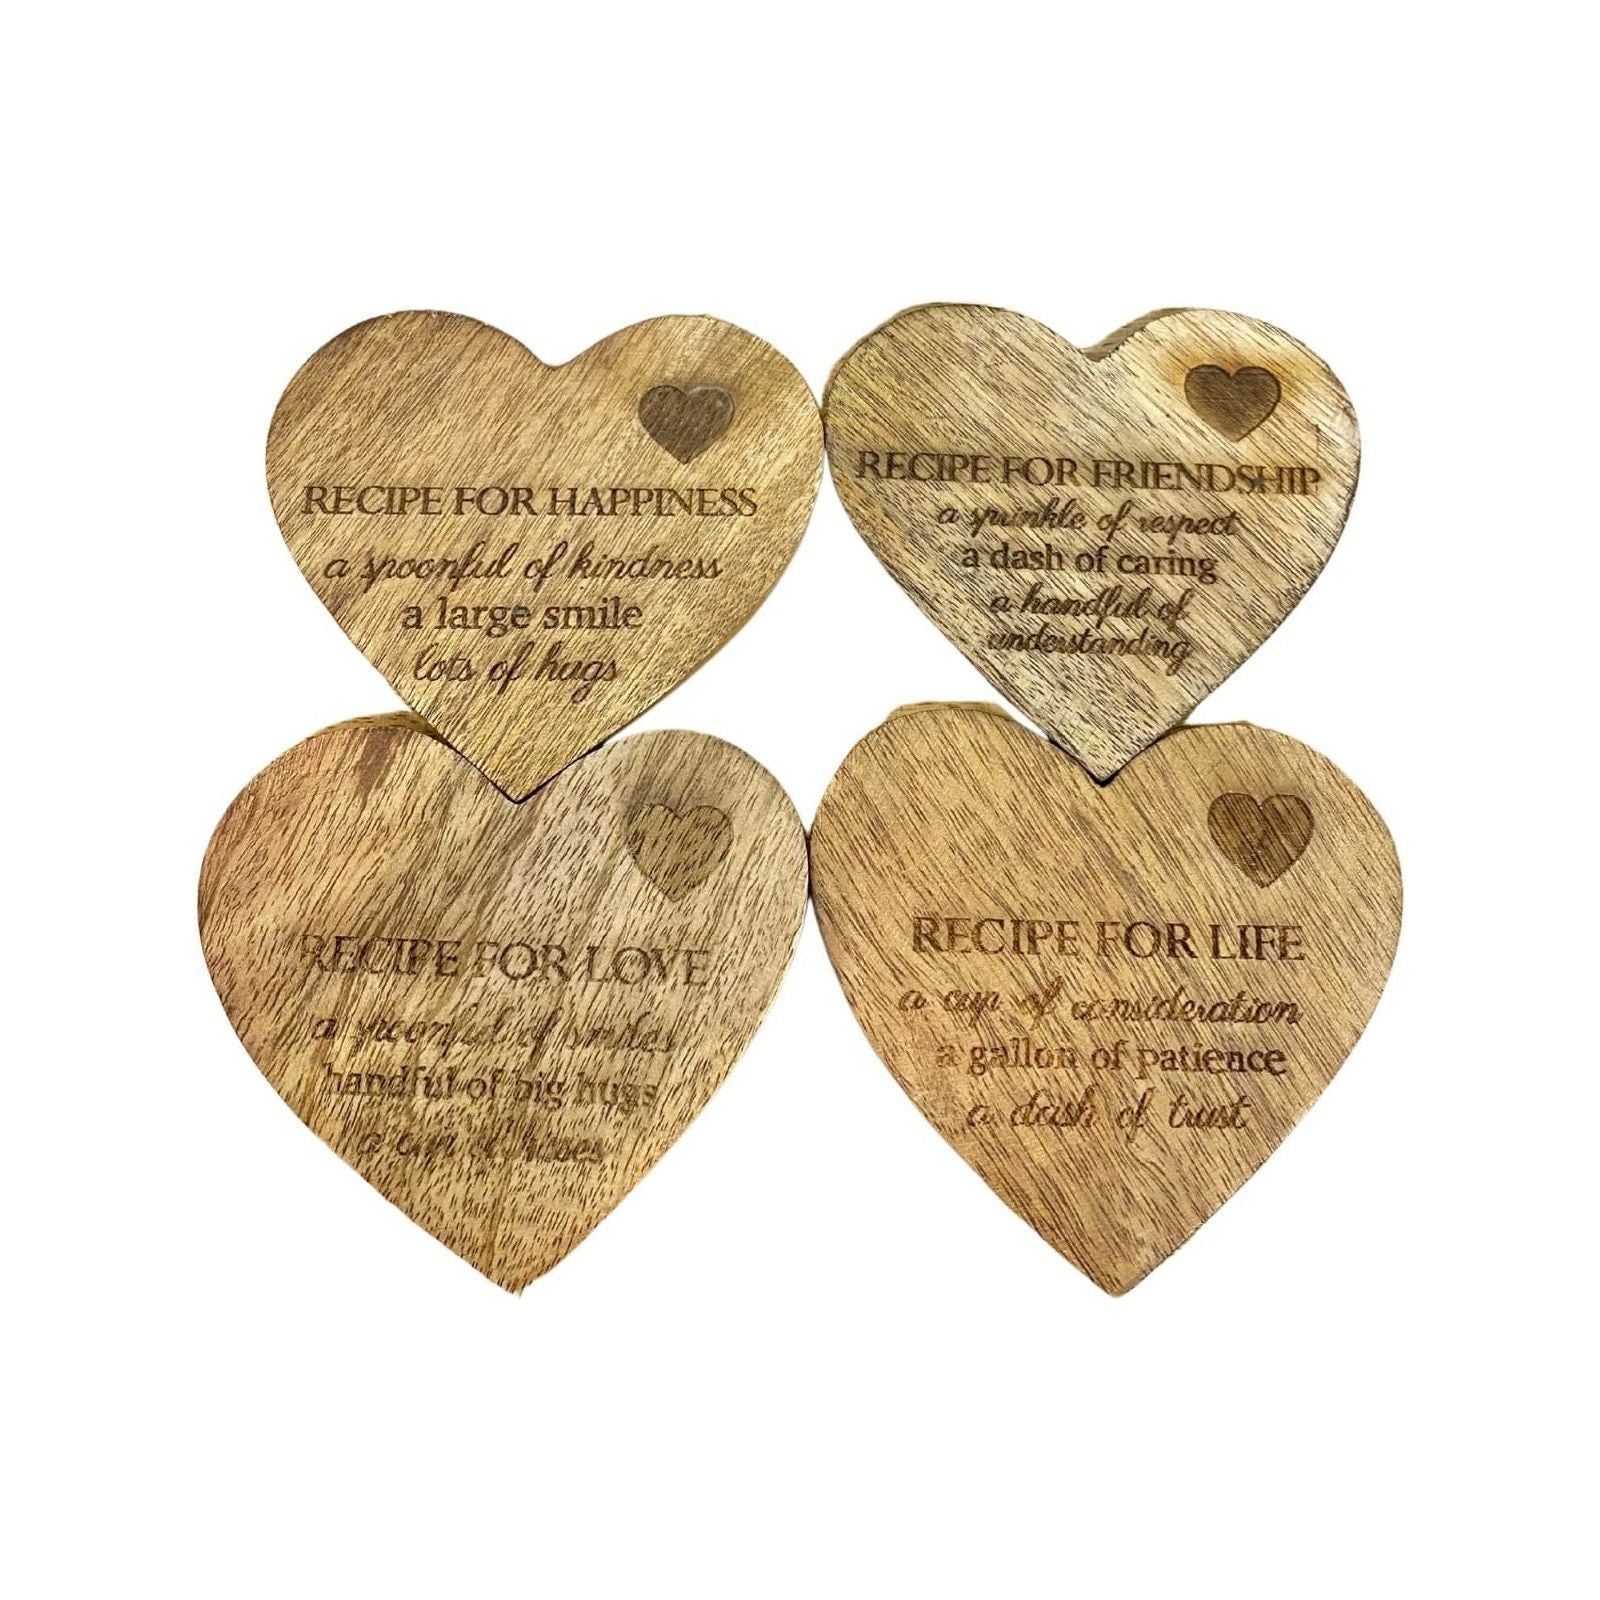 Set of 4 Wooden Heart Shaped Coasters - Ashton and Finch